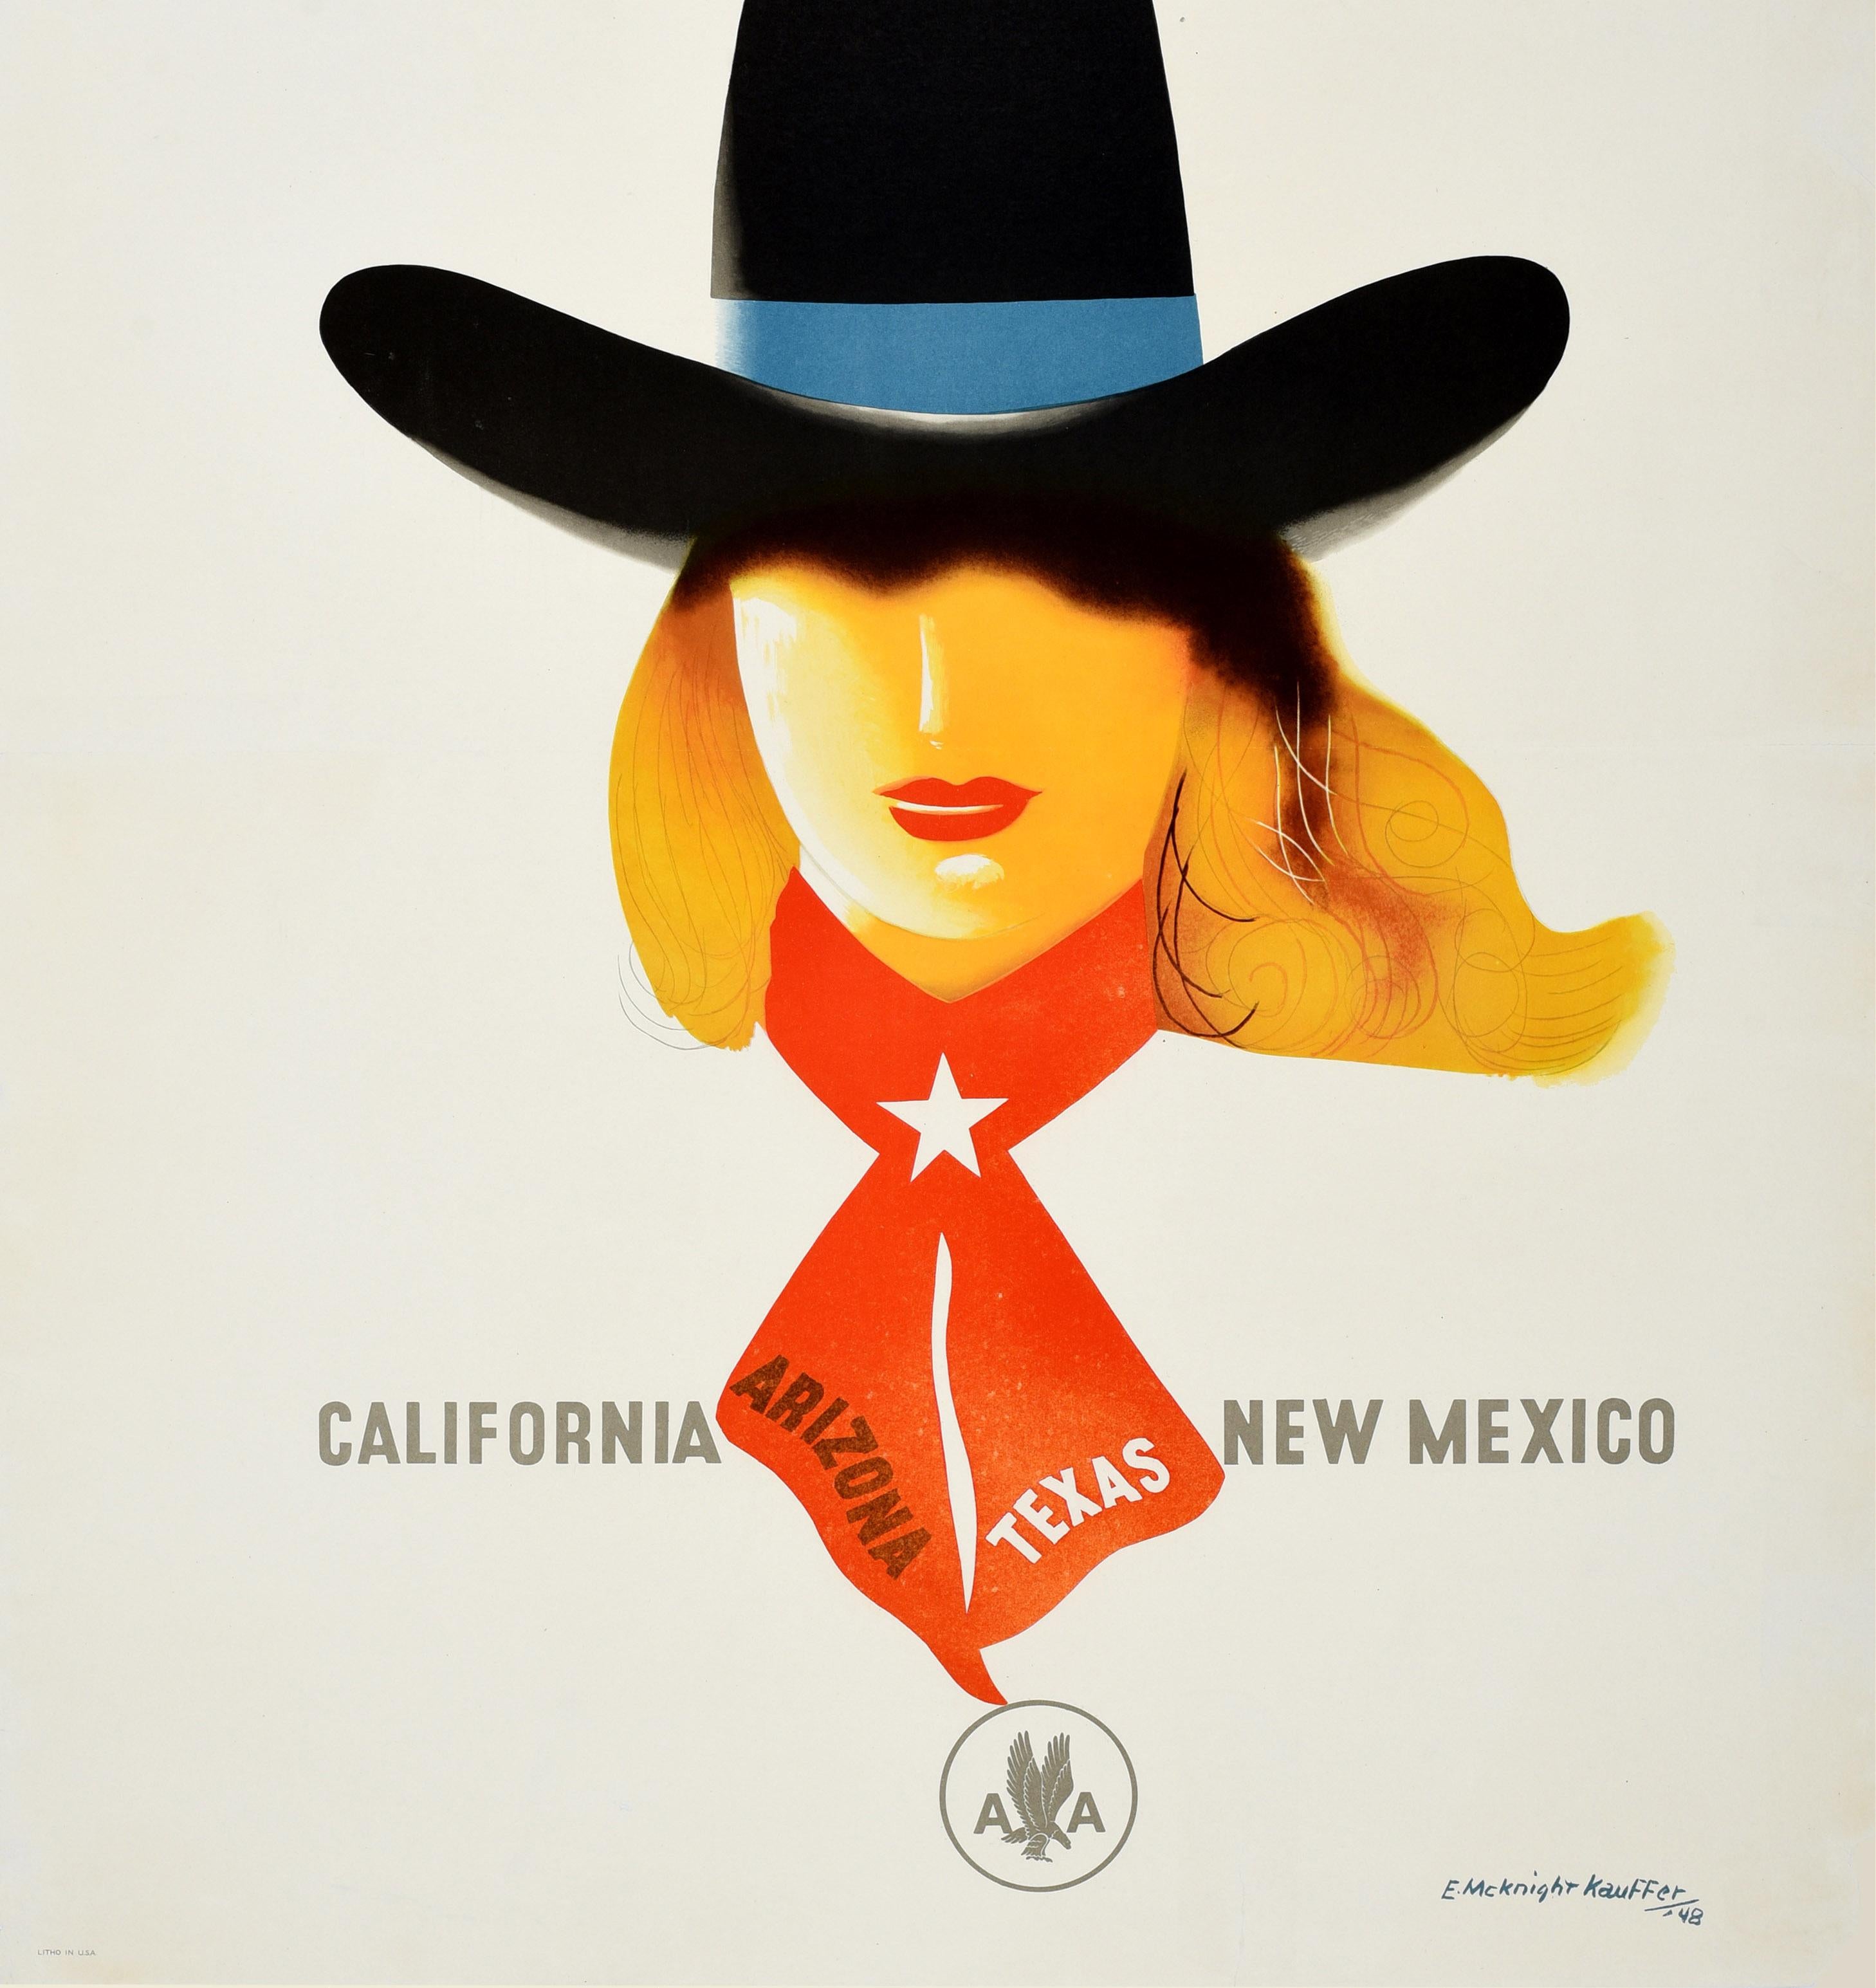 Original Vintage Travel Poster American Airlines California New Mexico Cowgirl 1